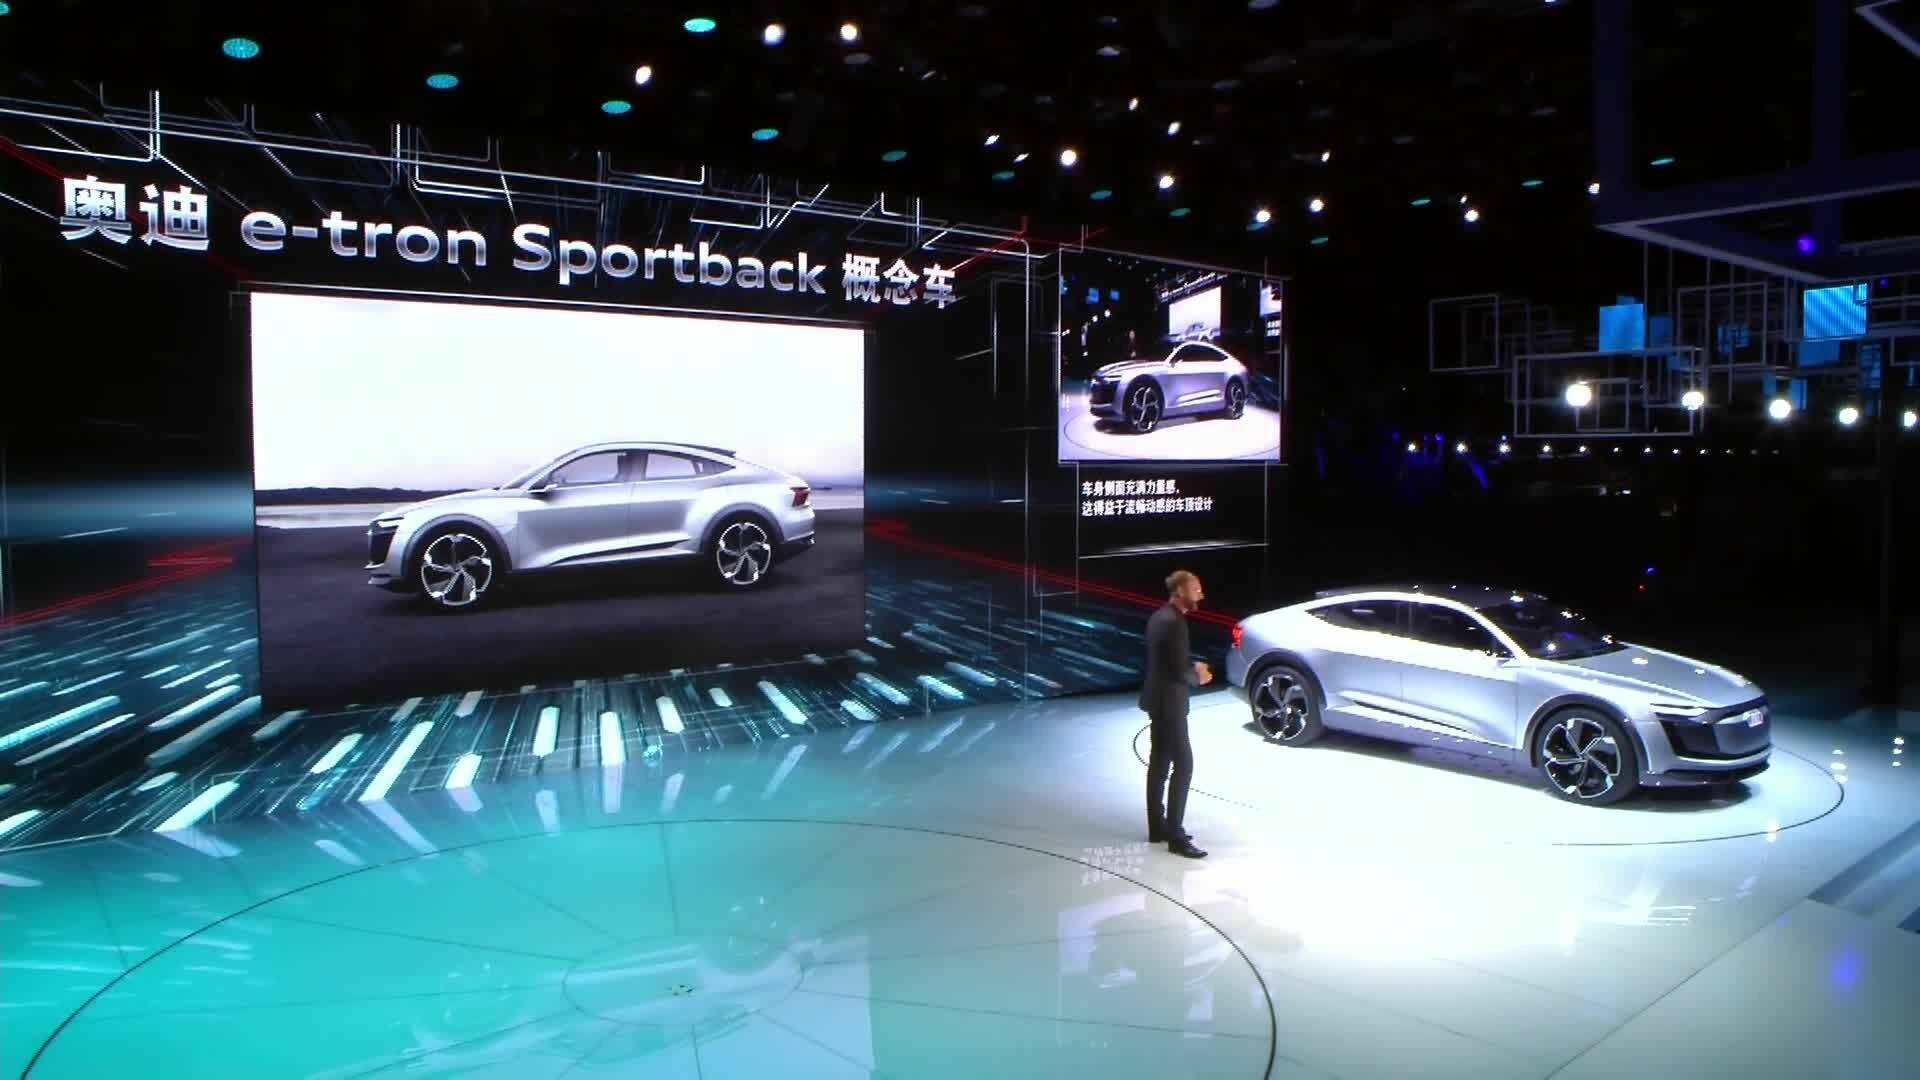 The Audi press conference at the Auto Shanghai 2017